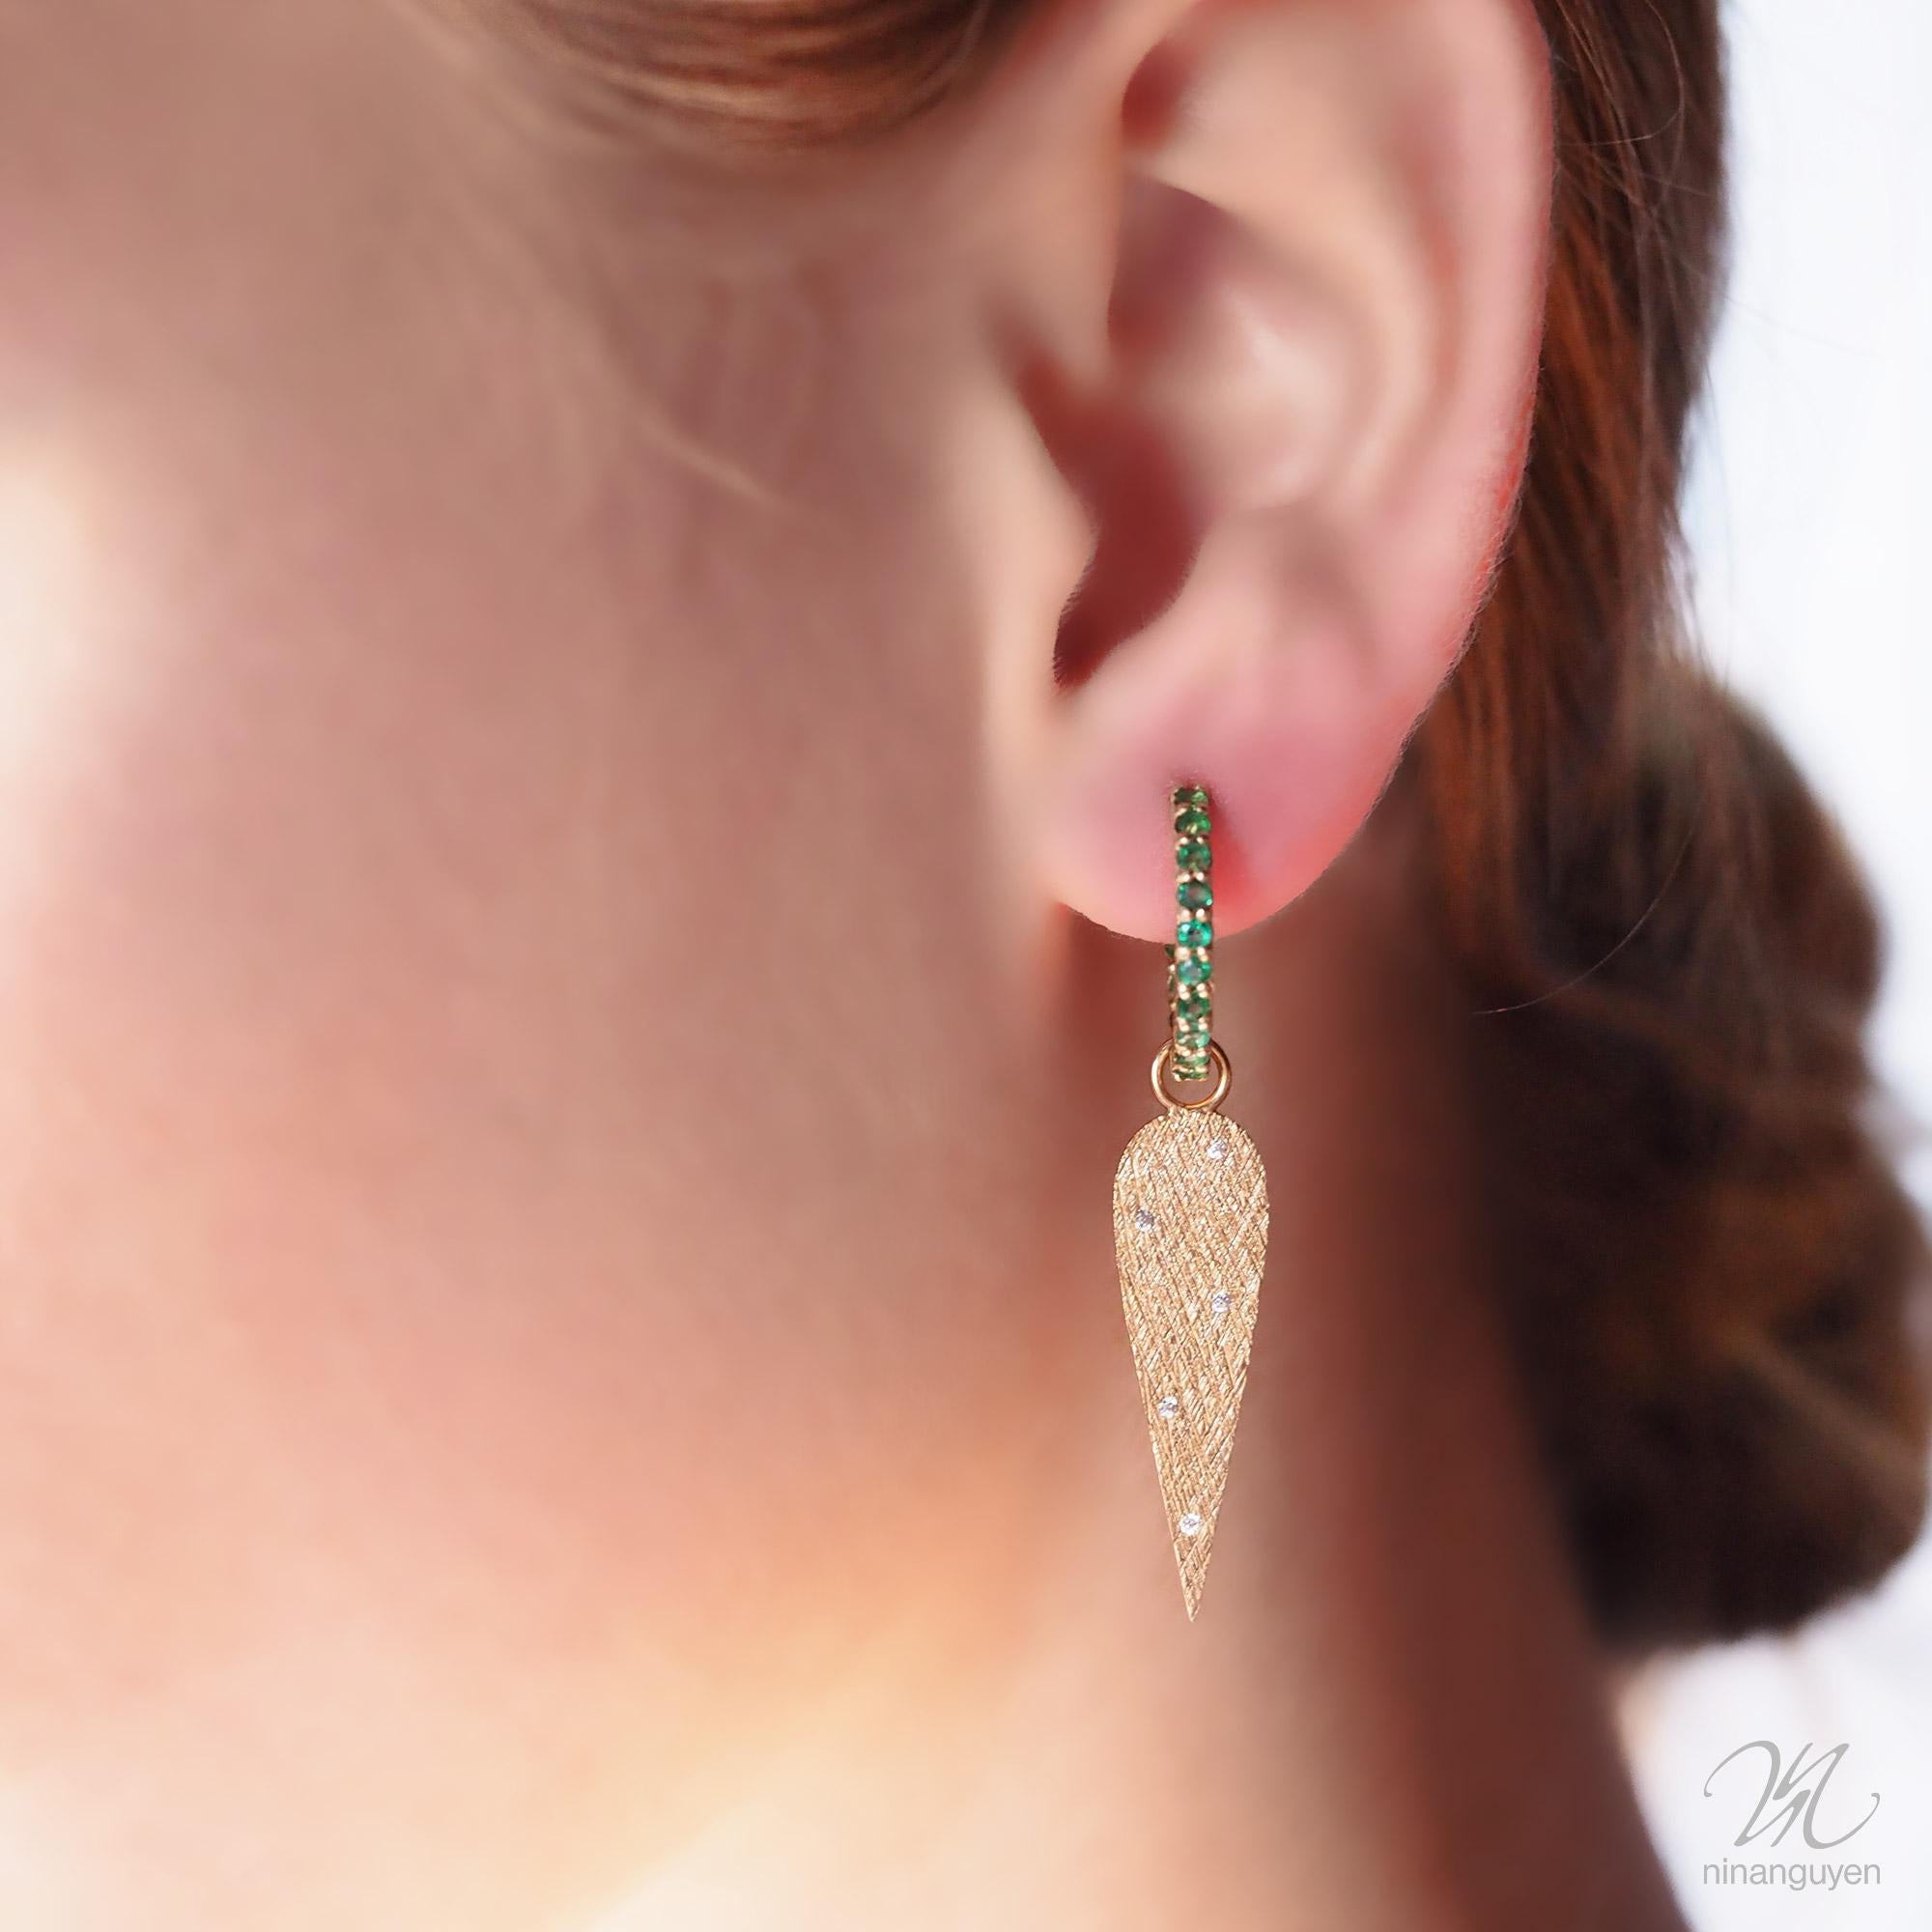 Perfect for days or evenings that demand a little glamour, the Angel Wings 30mm Gold Charms make a statement with diamonds on a rich gold background detailed with a feather-like crosshatch pattern.
Nina Nguyen Design's patent-pending earrings have